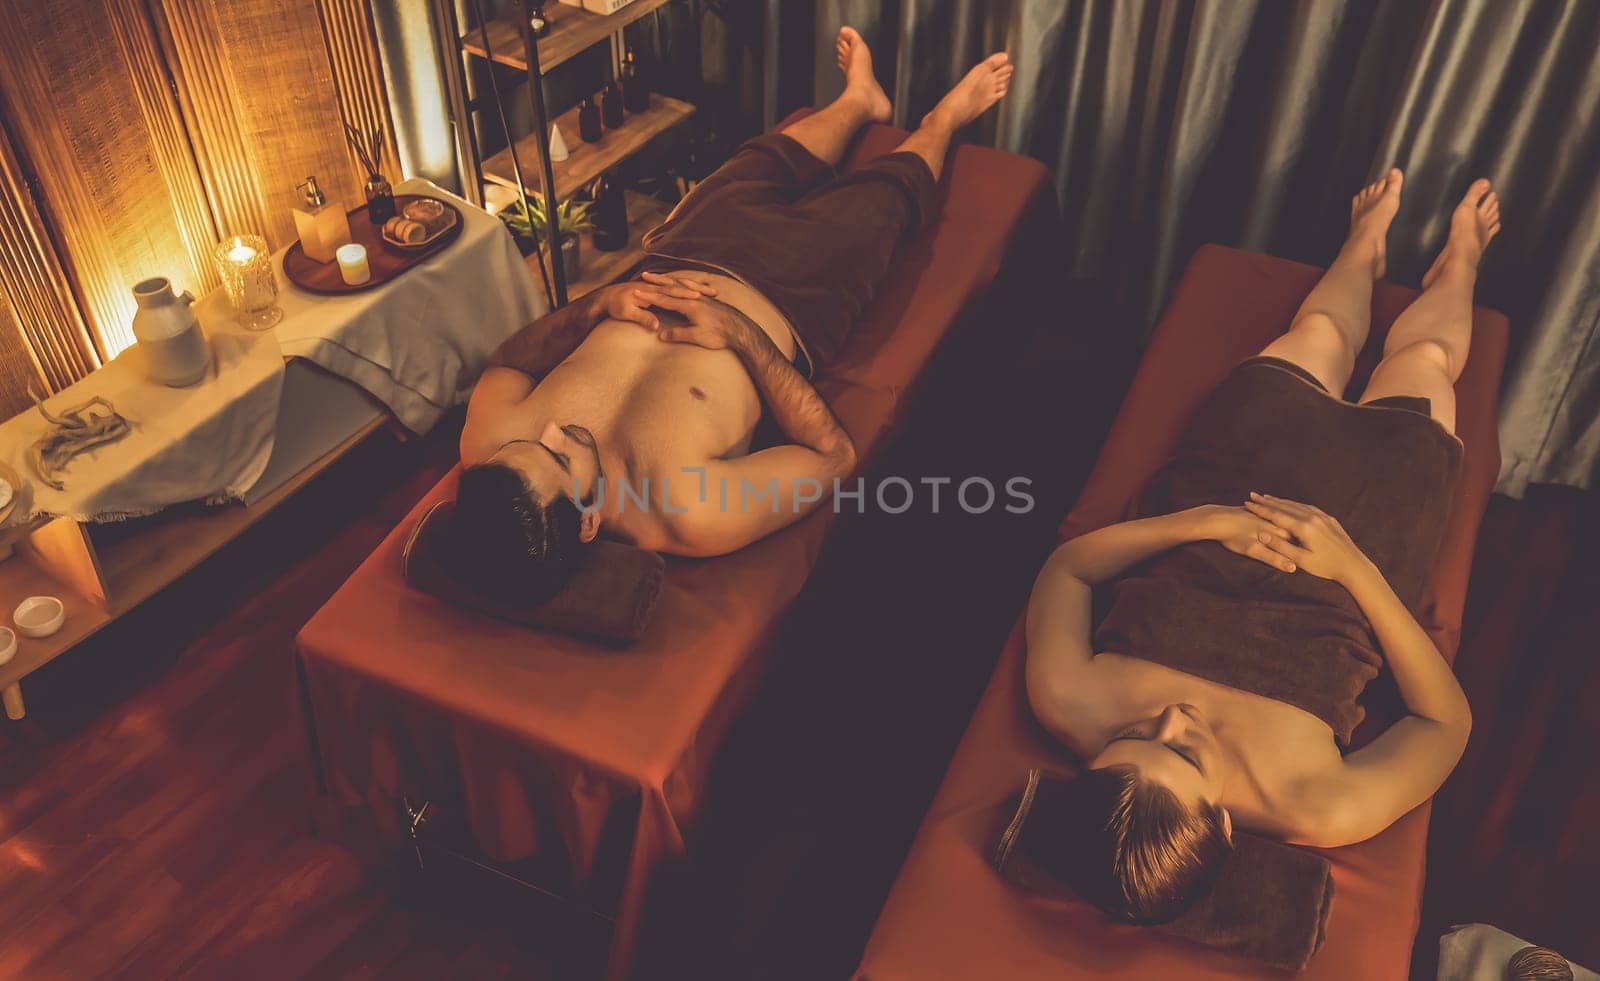 Caucasian couple customer enjoying relaxing anti-stress spa massage and pampering with beauty skin recreation leisure in warm candle lighting ambient salon spa at luxury resort or hotel. Quiescent